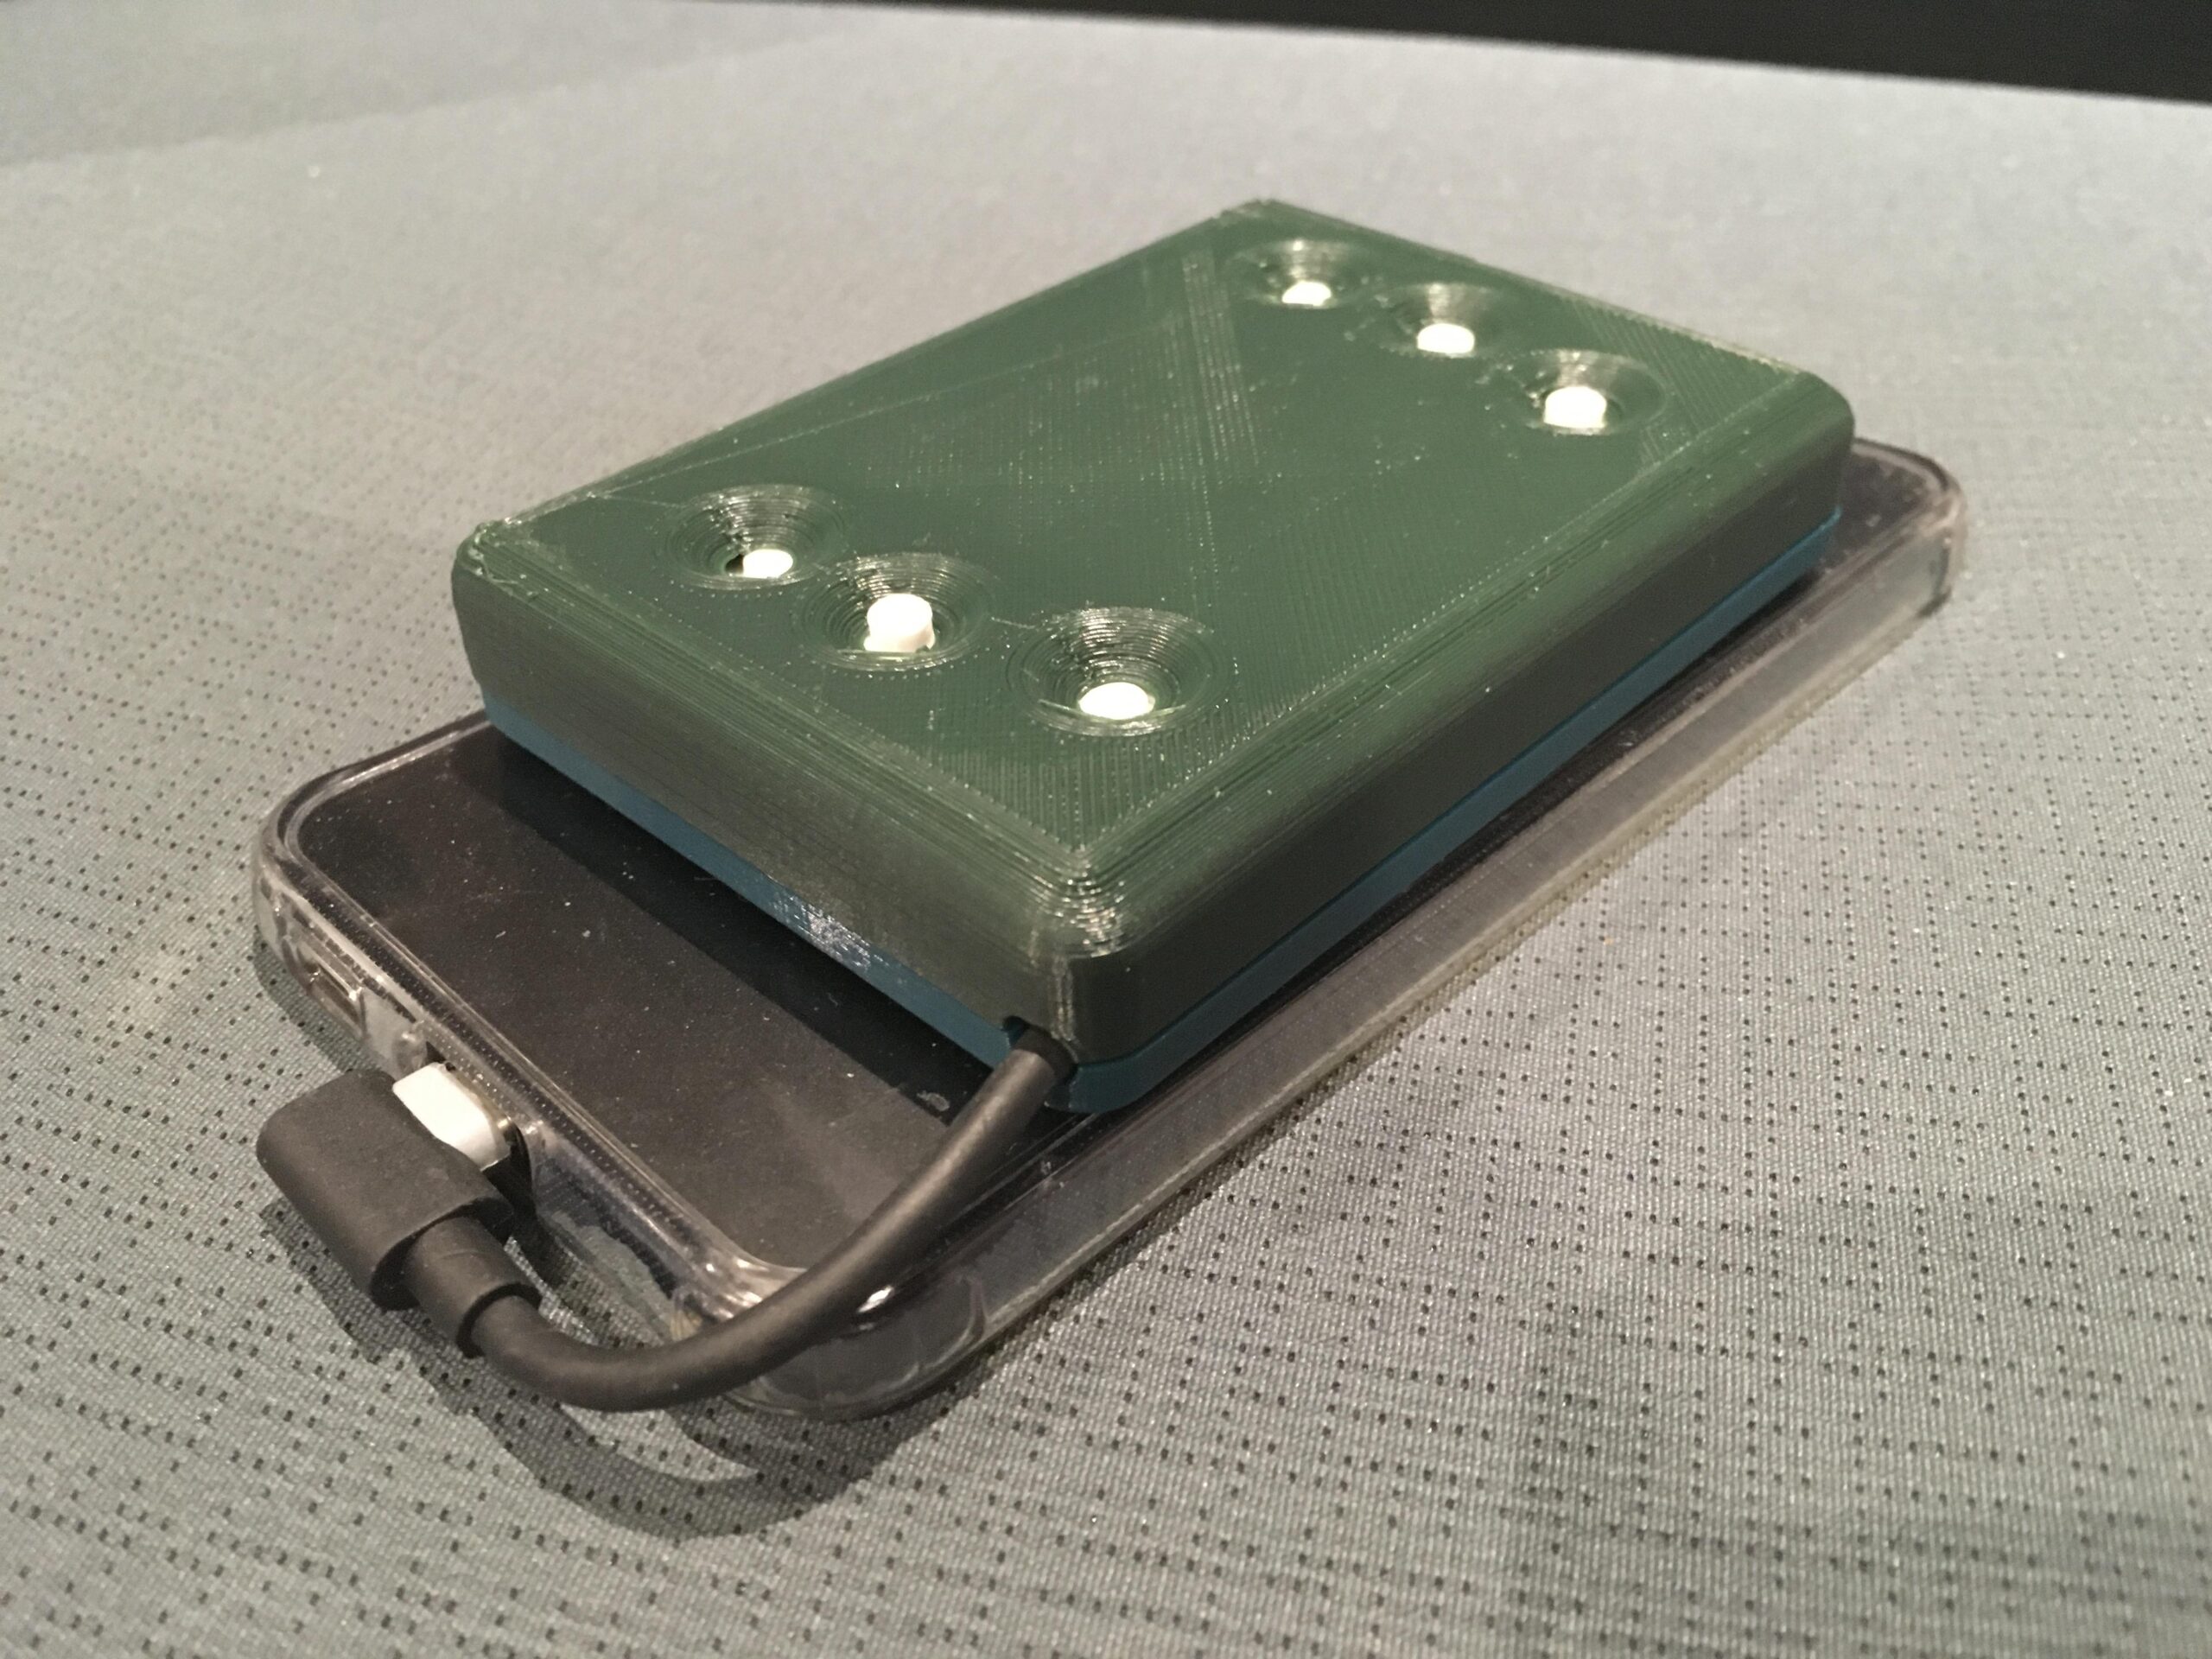 This small device allows users to feel Braille using haptics